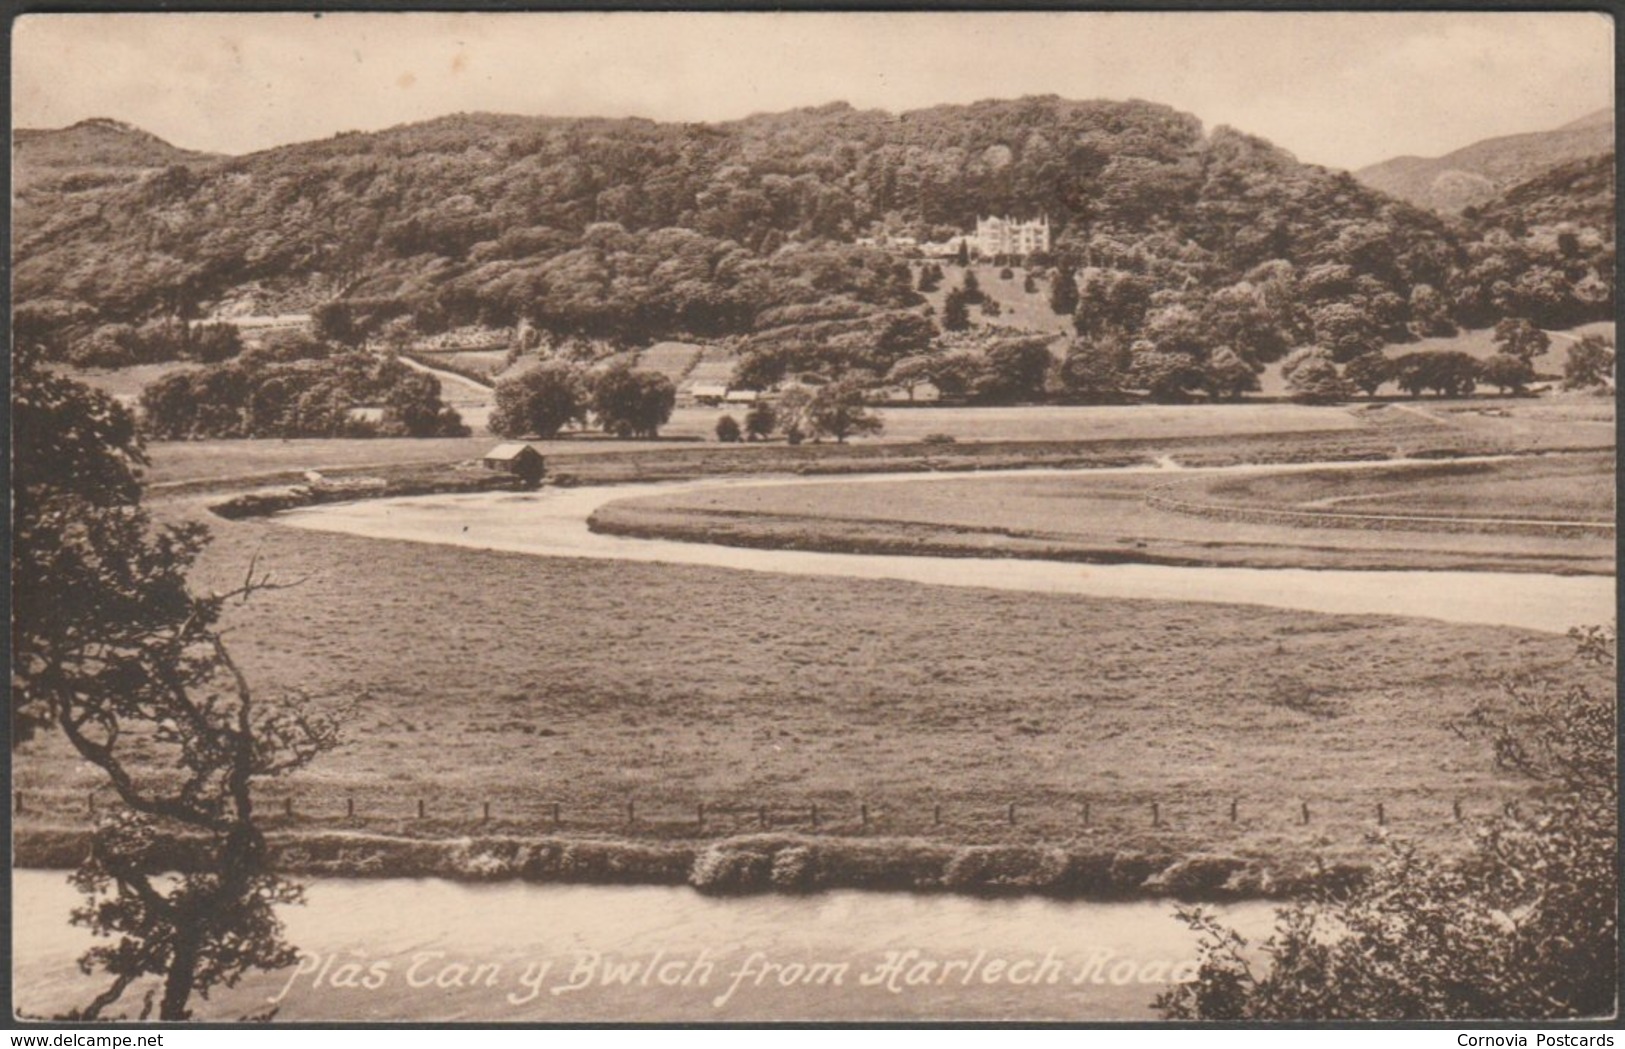 Plas Tan Y Bwlch From Harlech Road, Merionethshire, 1923 - Frith's Postcard - Merionethshire